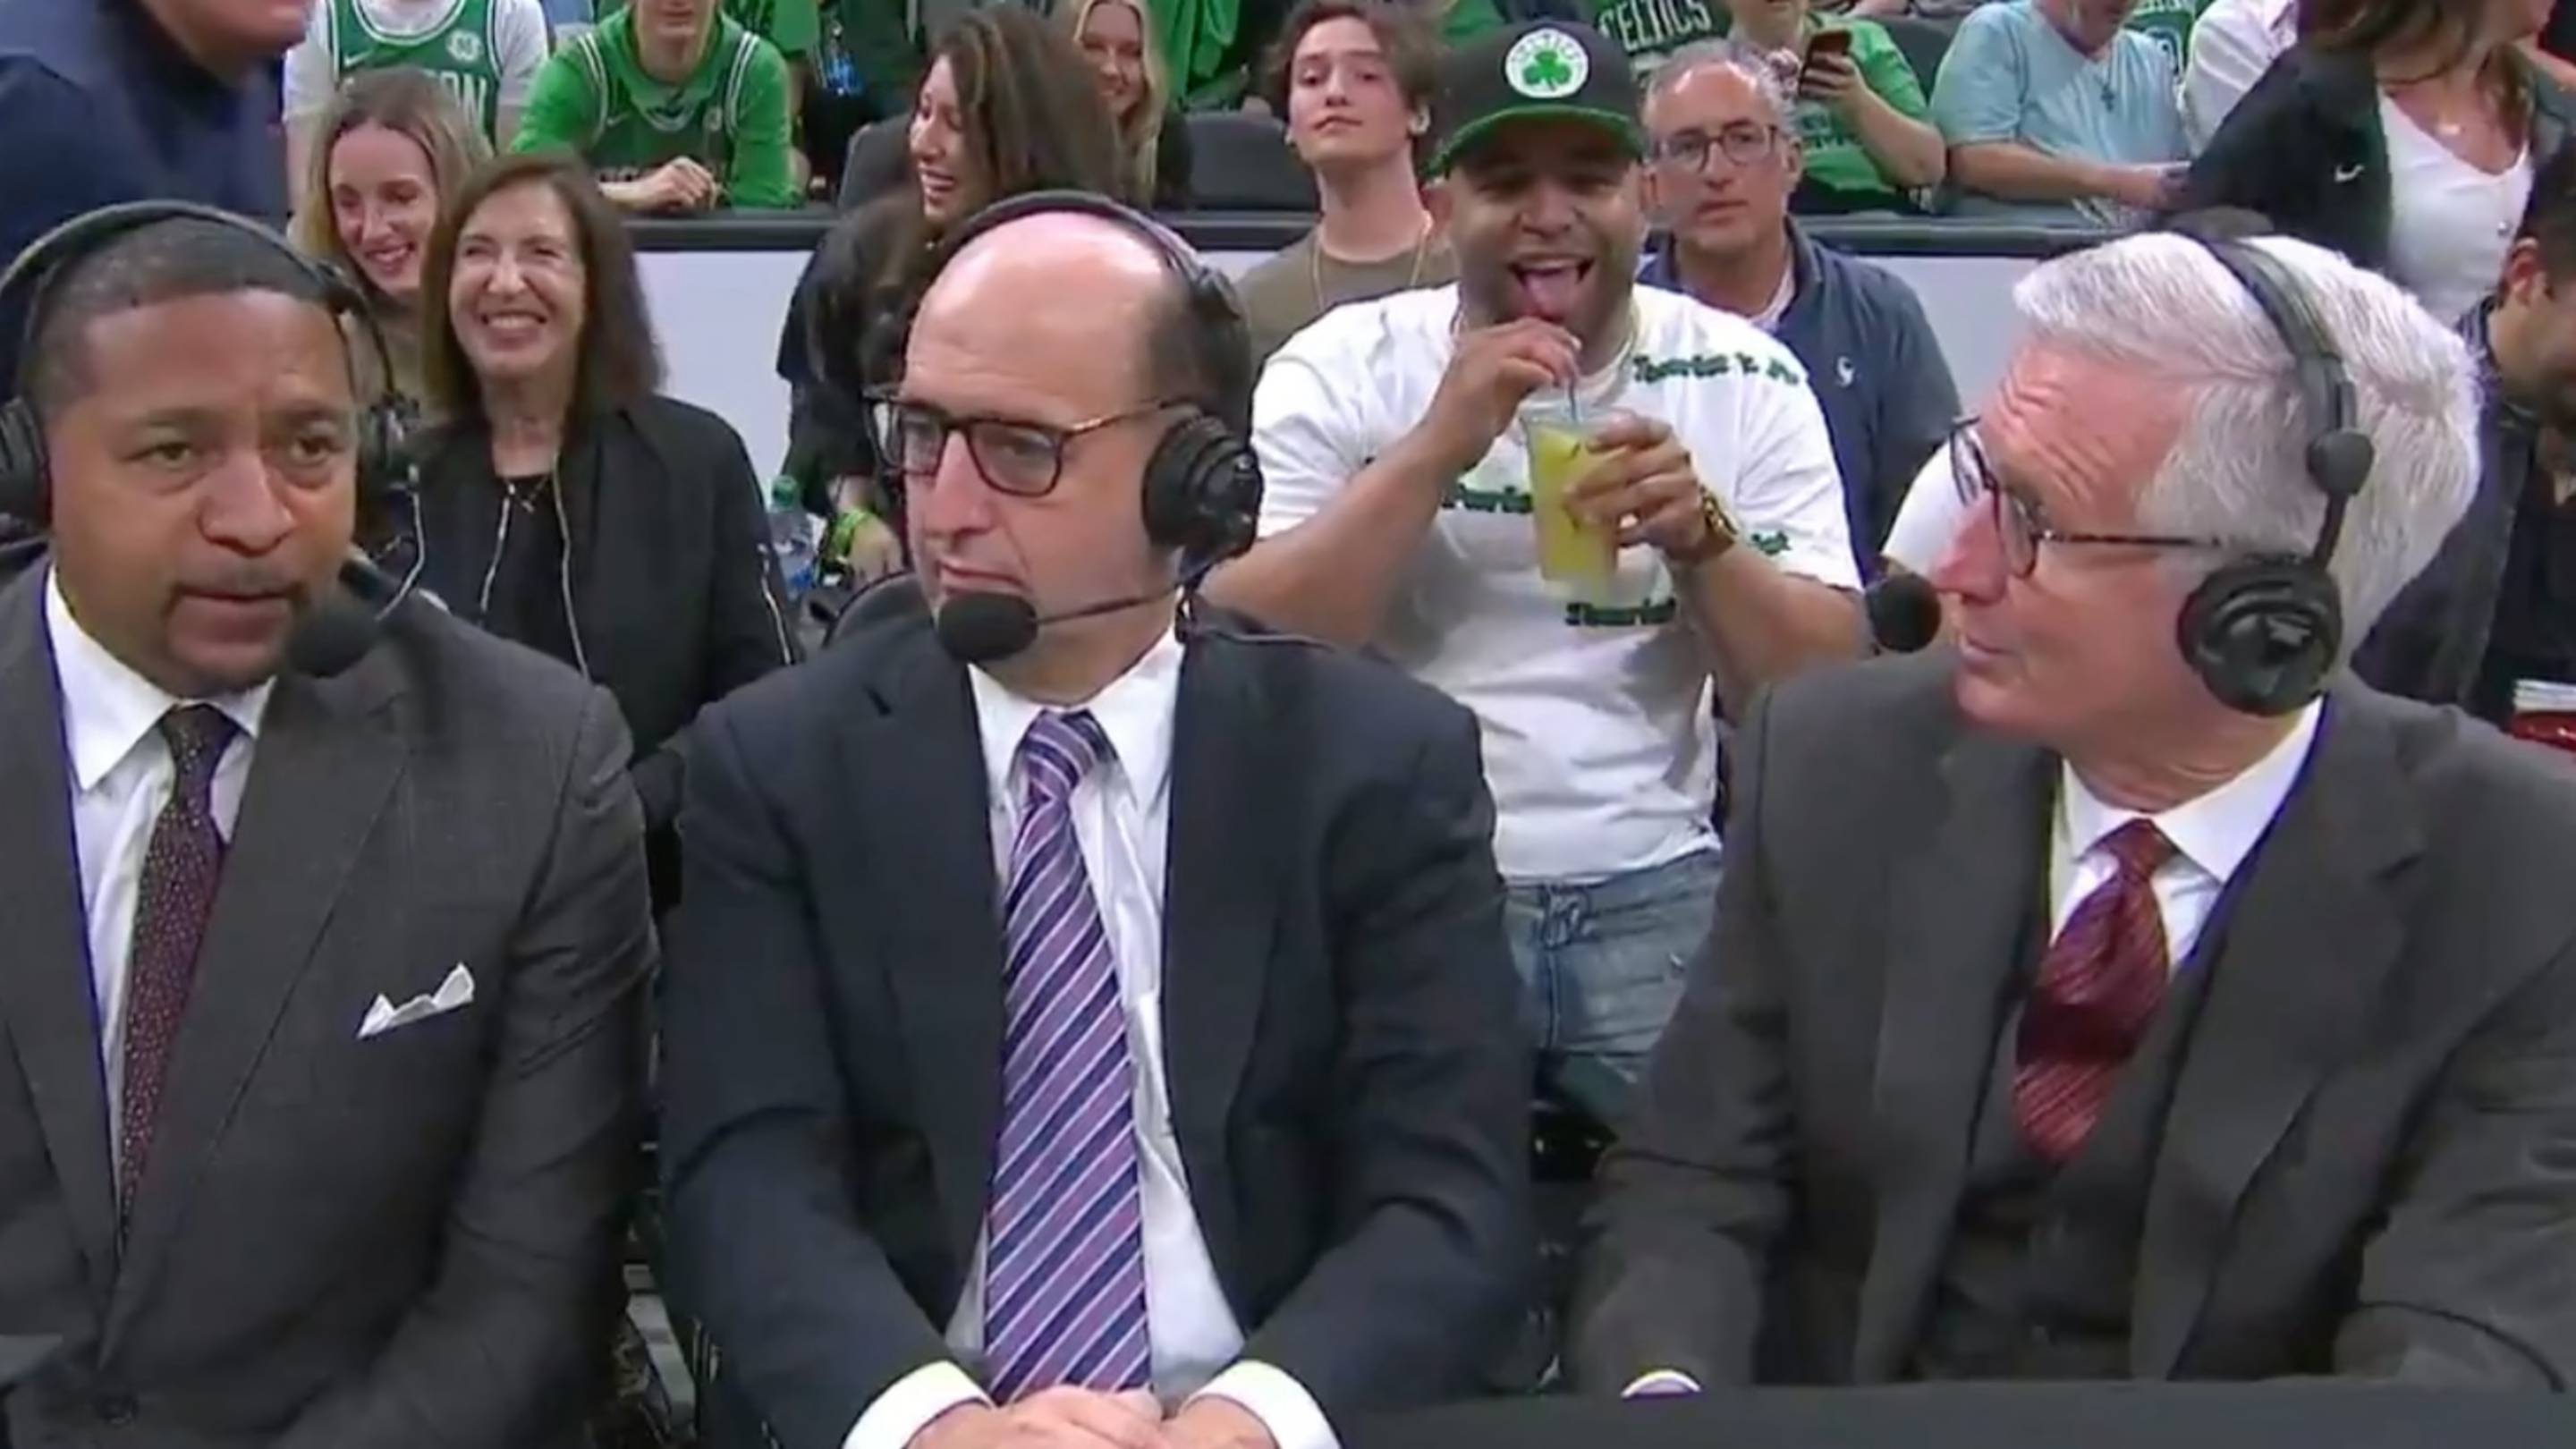 ESPN Now Censoring Celtics Fans Who Are Just Trying to Give the Camera
the Finger